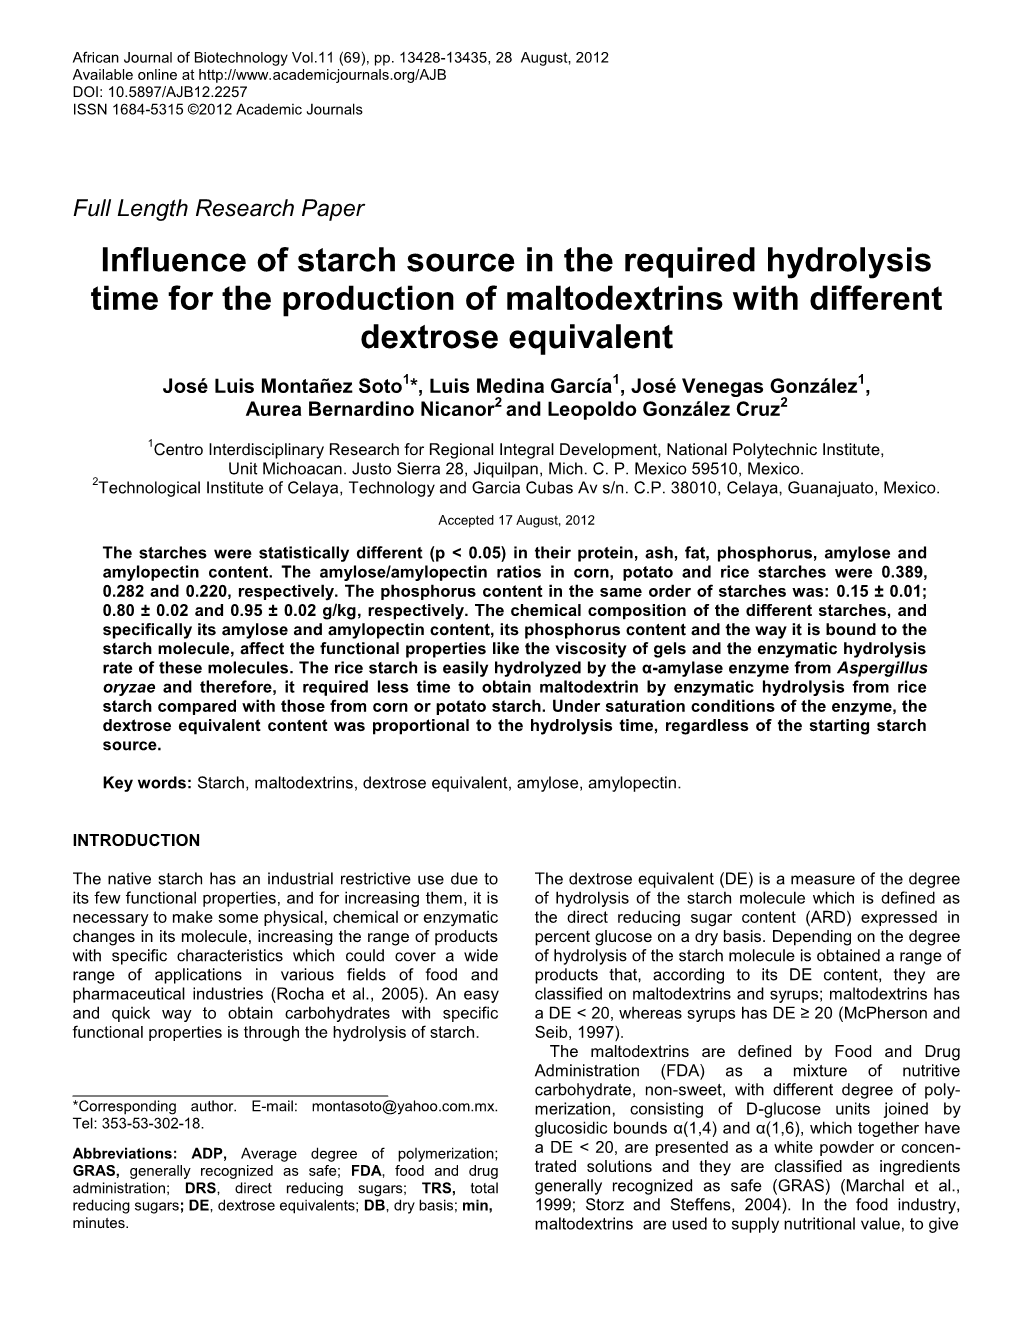 Influence of Starch Source in the Required Hydrolysis Time for the Production of Maltodextrins with Different Dextrose Equivalent